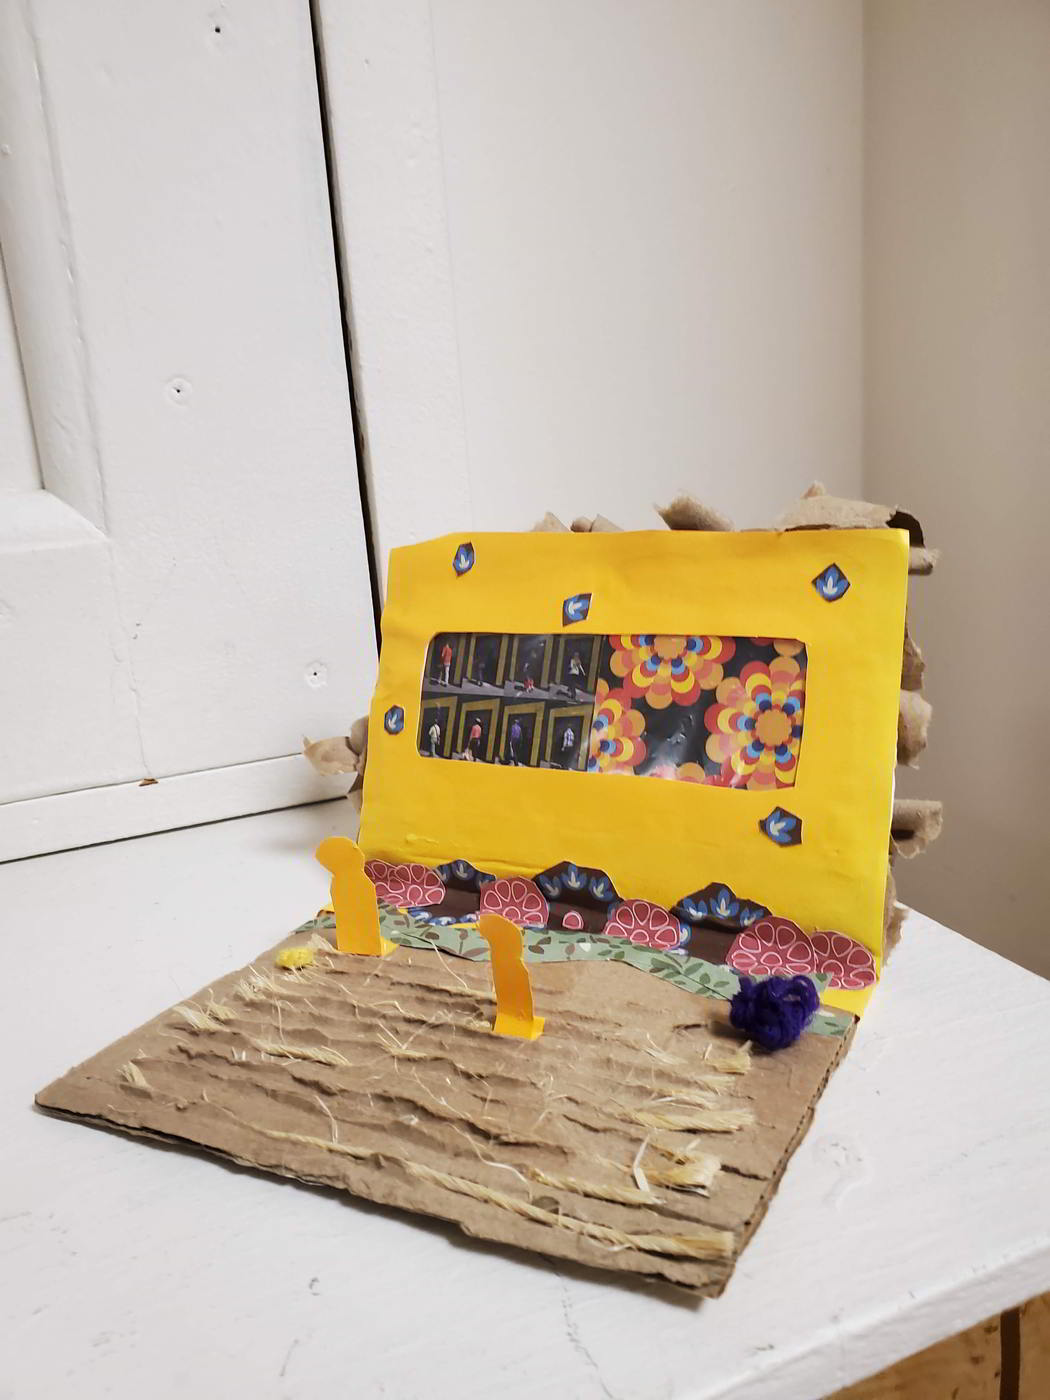 A cardboard Book shaped mini theater / laptop with a yellow background and cut out figures.